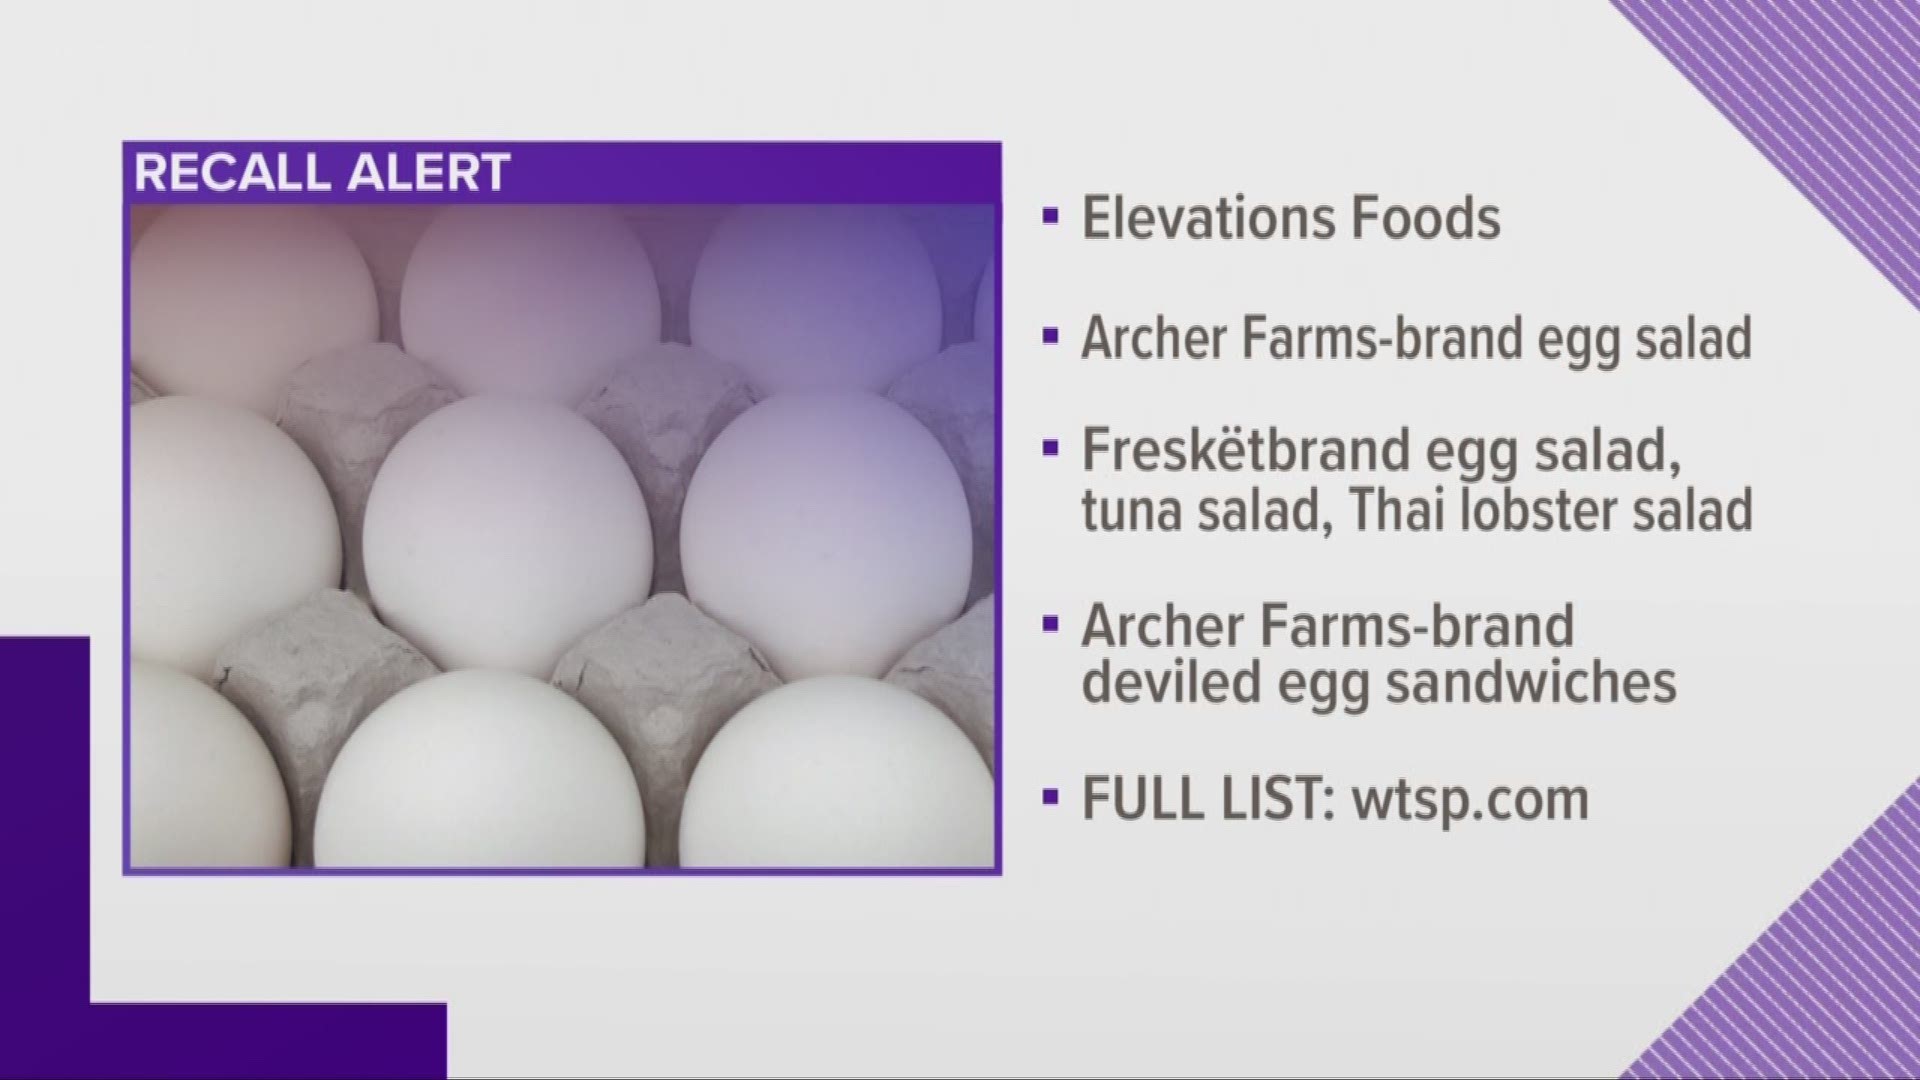 Check your fridge because some packaged salads and sandwiches made by  Elevations Foods are being voluntarily recalled.

The recall is due to possible Listeria contamination in Archer Farms-brand egg salad; Freskëtbrand egg salad, tuna salad, and Thai lobster salad; and Archer Farms-brand deviled egg sandwiches produced on June 18, 2019, according to the  U.S. Food and Drug Administration’s website.